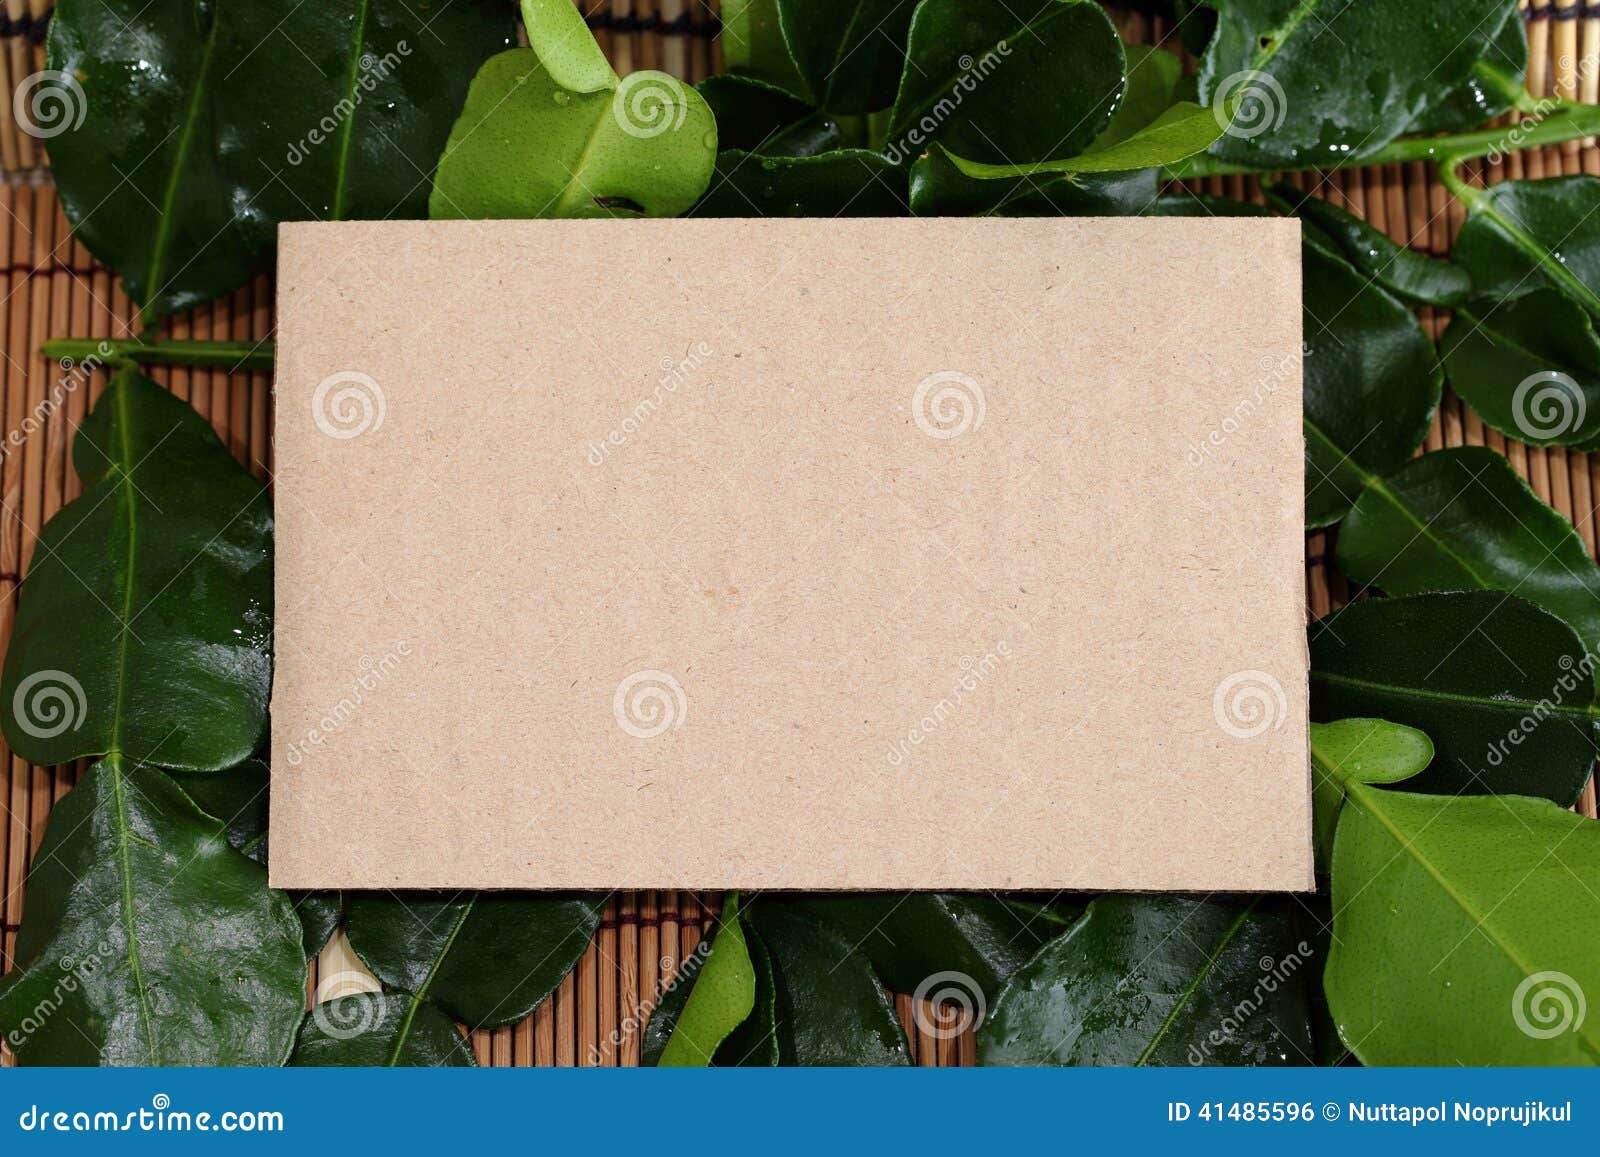 28,440 Brown Paper Bouquet Royalty-Free Images, Stock Photos & Pictures